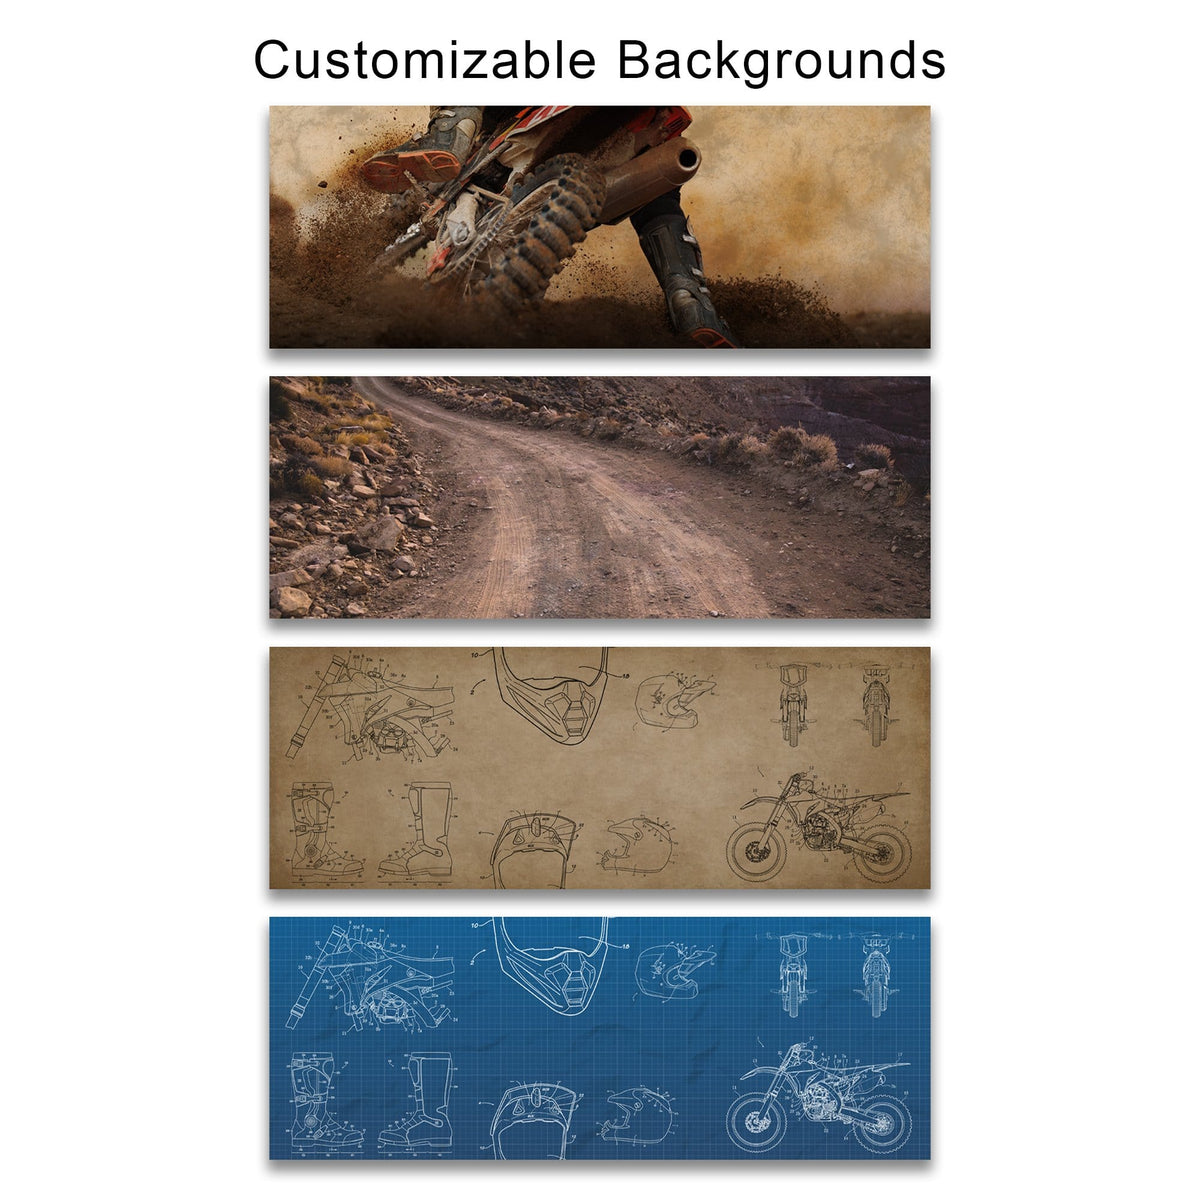 Several Great background options for your customized art